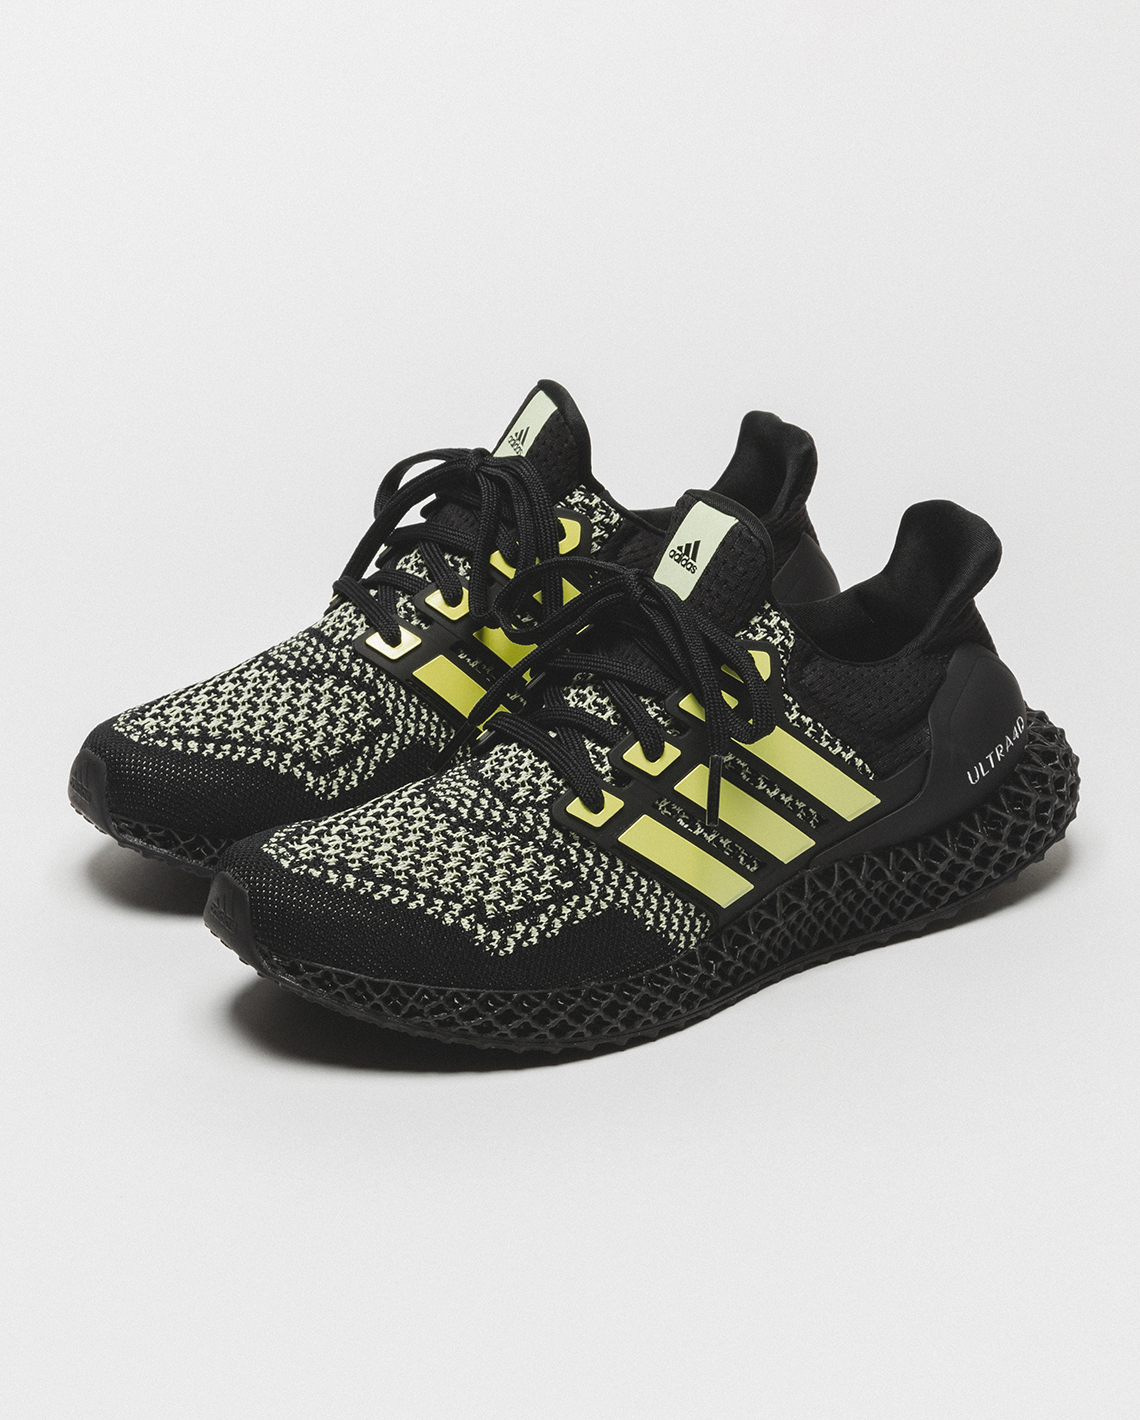 adidas shopping guide march 2022 footwear 4d gallery 1